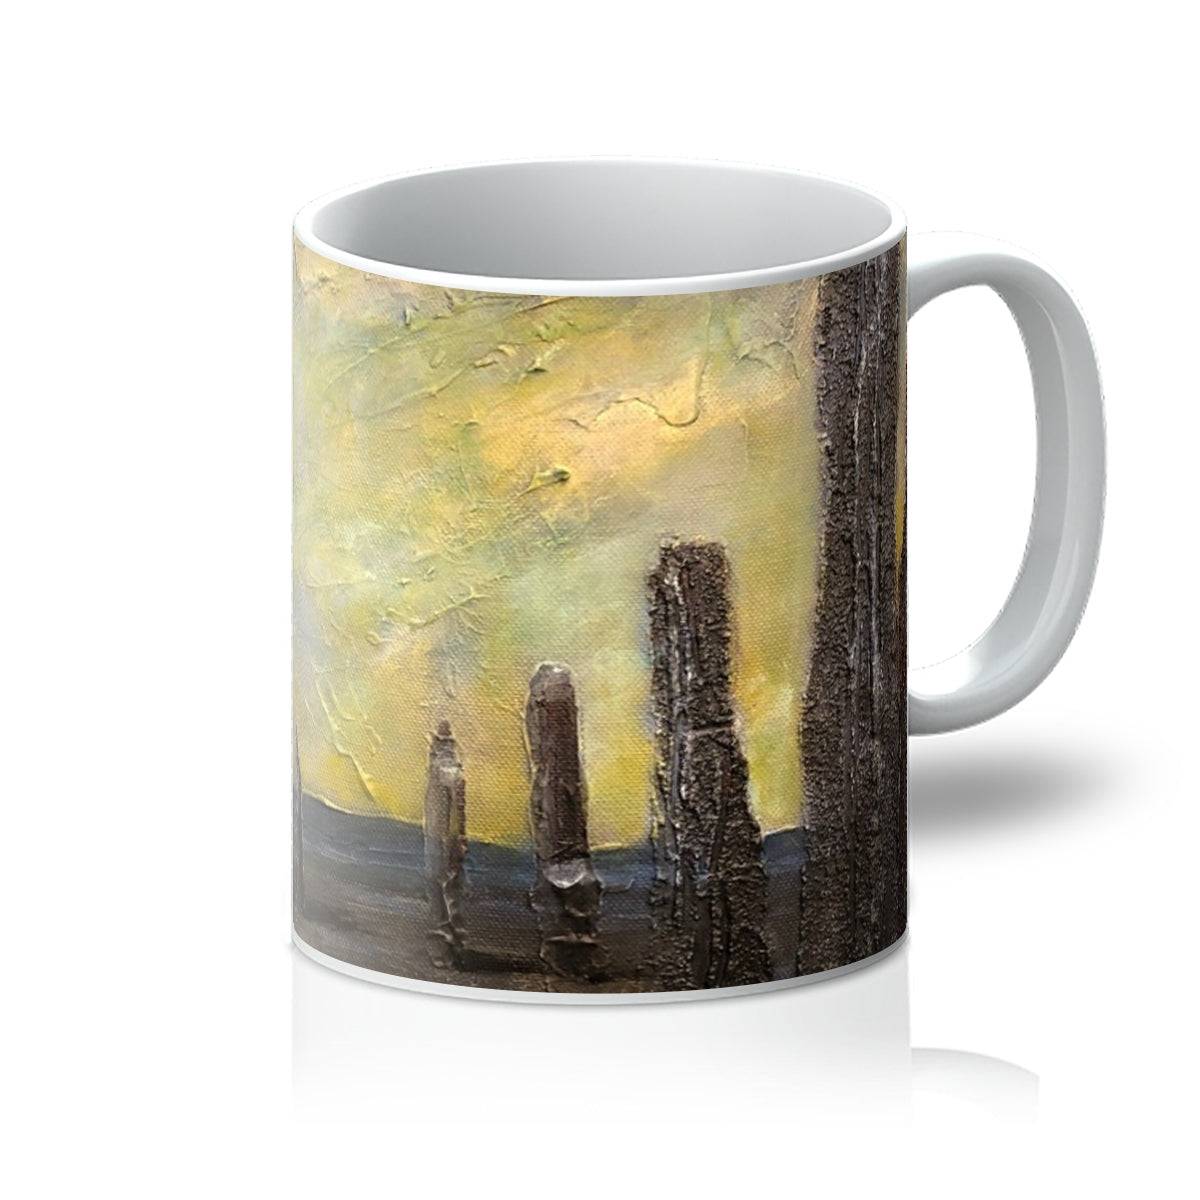 An Ethereal Ring Of Brodgar Art Gifts Mug-Mugs-Orkney Art Gallery-11oz-White-Paintings, Prints, Homeware, Art Gifts From Scotland By Scottish Artist Kevin Hunter